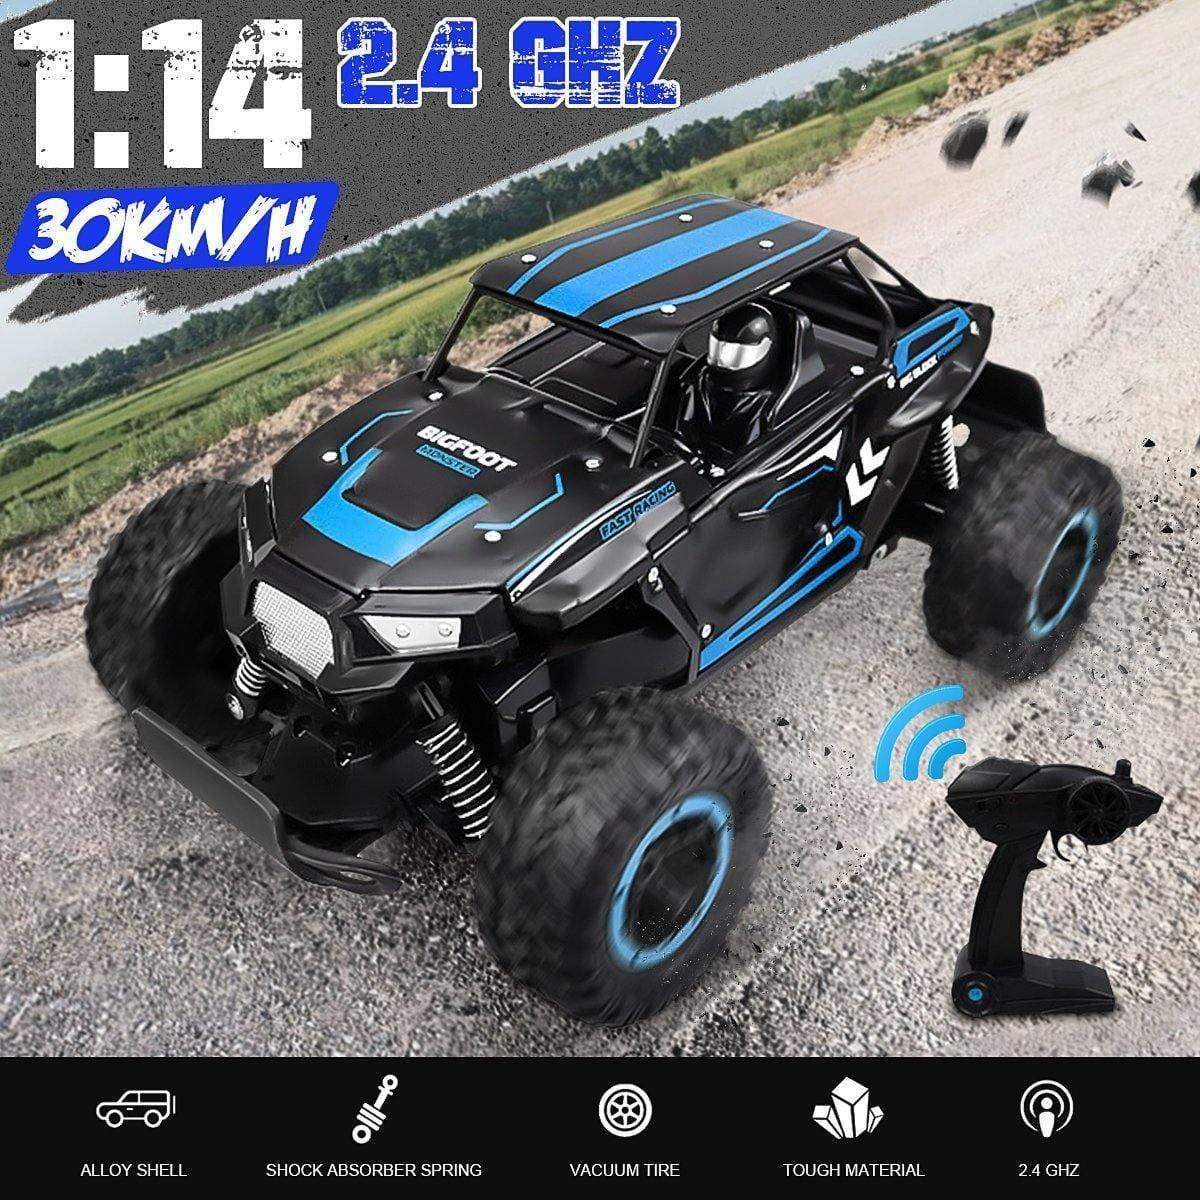 ezy2find remote control toy Blue 1/14 2.4G Alloy High Speed RC Car Big Foot Off-road Drift Vehicle Model Indoor Outdoor Toys